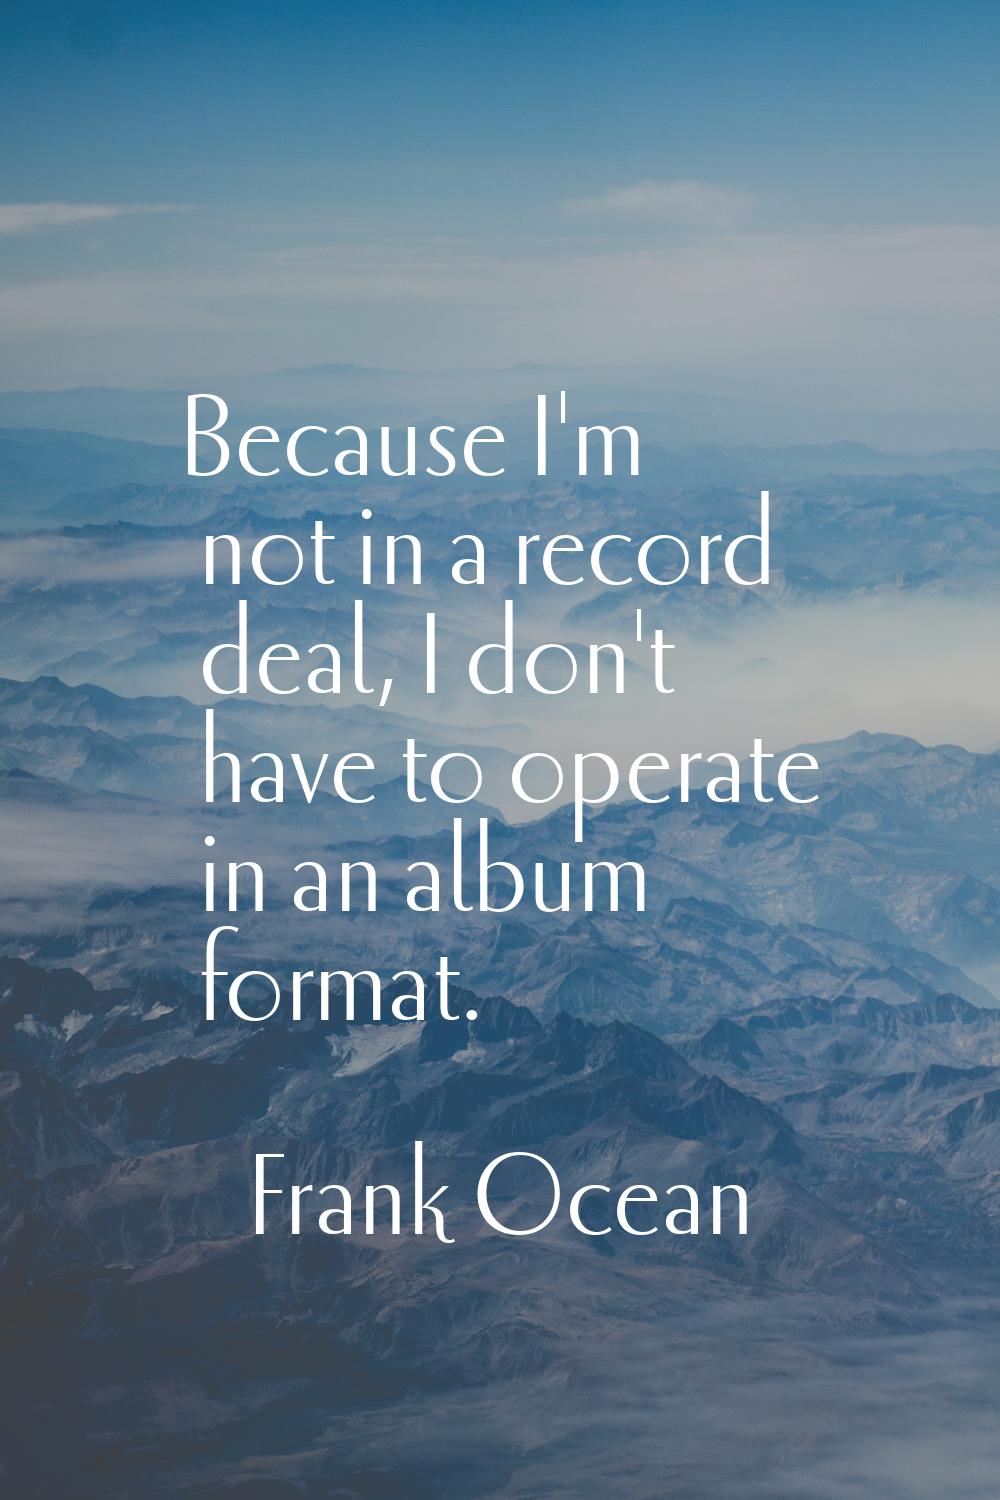 Because I'm not in a record deal, I don't have to operate in an album format.